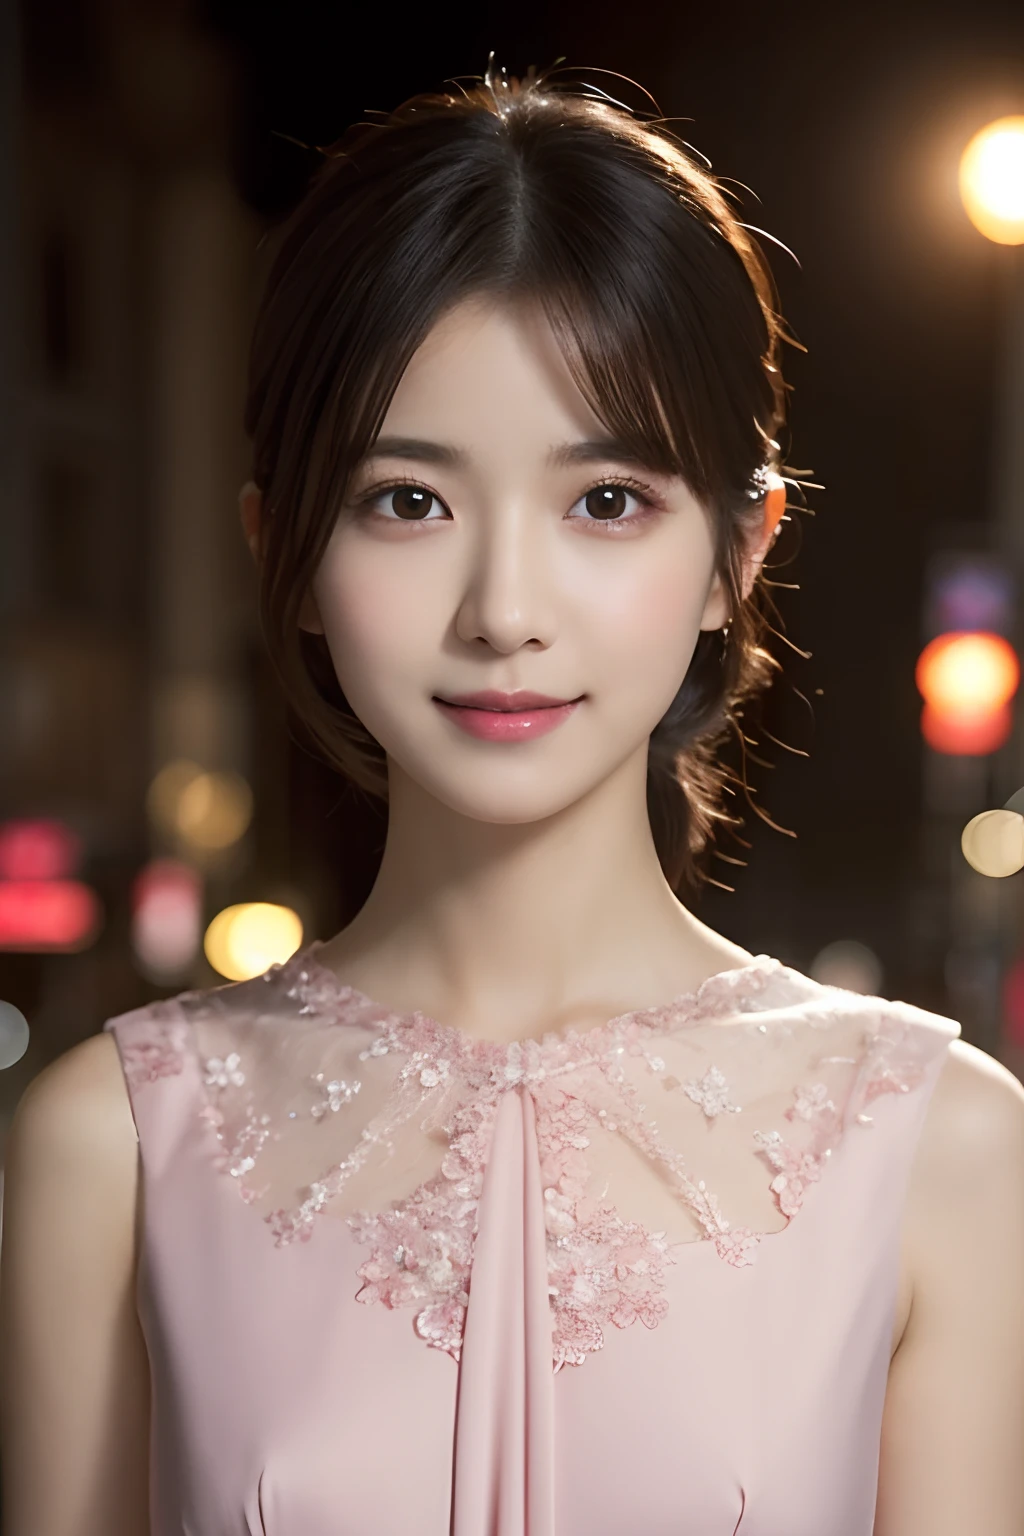 1girl in, (Wearing a pink classy dress:1.2), (Raw photo, Best Quality), (Realistic, Photorealsitic:1.4), masutepiece, Extremely delicate and beautiful, Extremely detailed, 2k wallpaper, amazing, finely detail, the Extremely Detailed CG Unity 8K Wallpapers, Ultra-detailed, hight resolution, Soft light, Beautiful detailed girl, extremely detailed eye and face, beautiful detailed nose, Beautiful detailed eyes, Cinematic lighting, city light at night, Perfect Anatomy, Slender body, Smiling